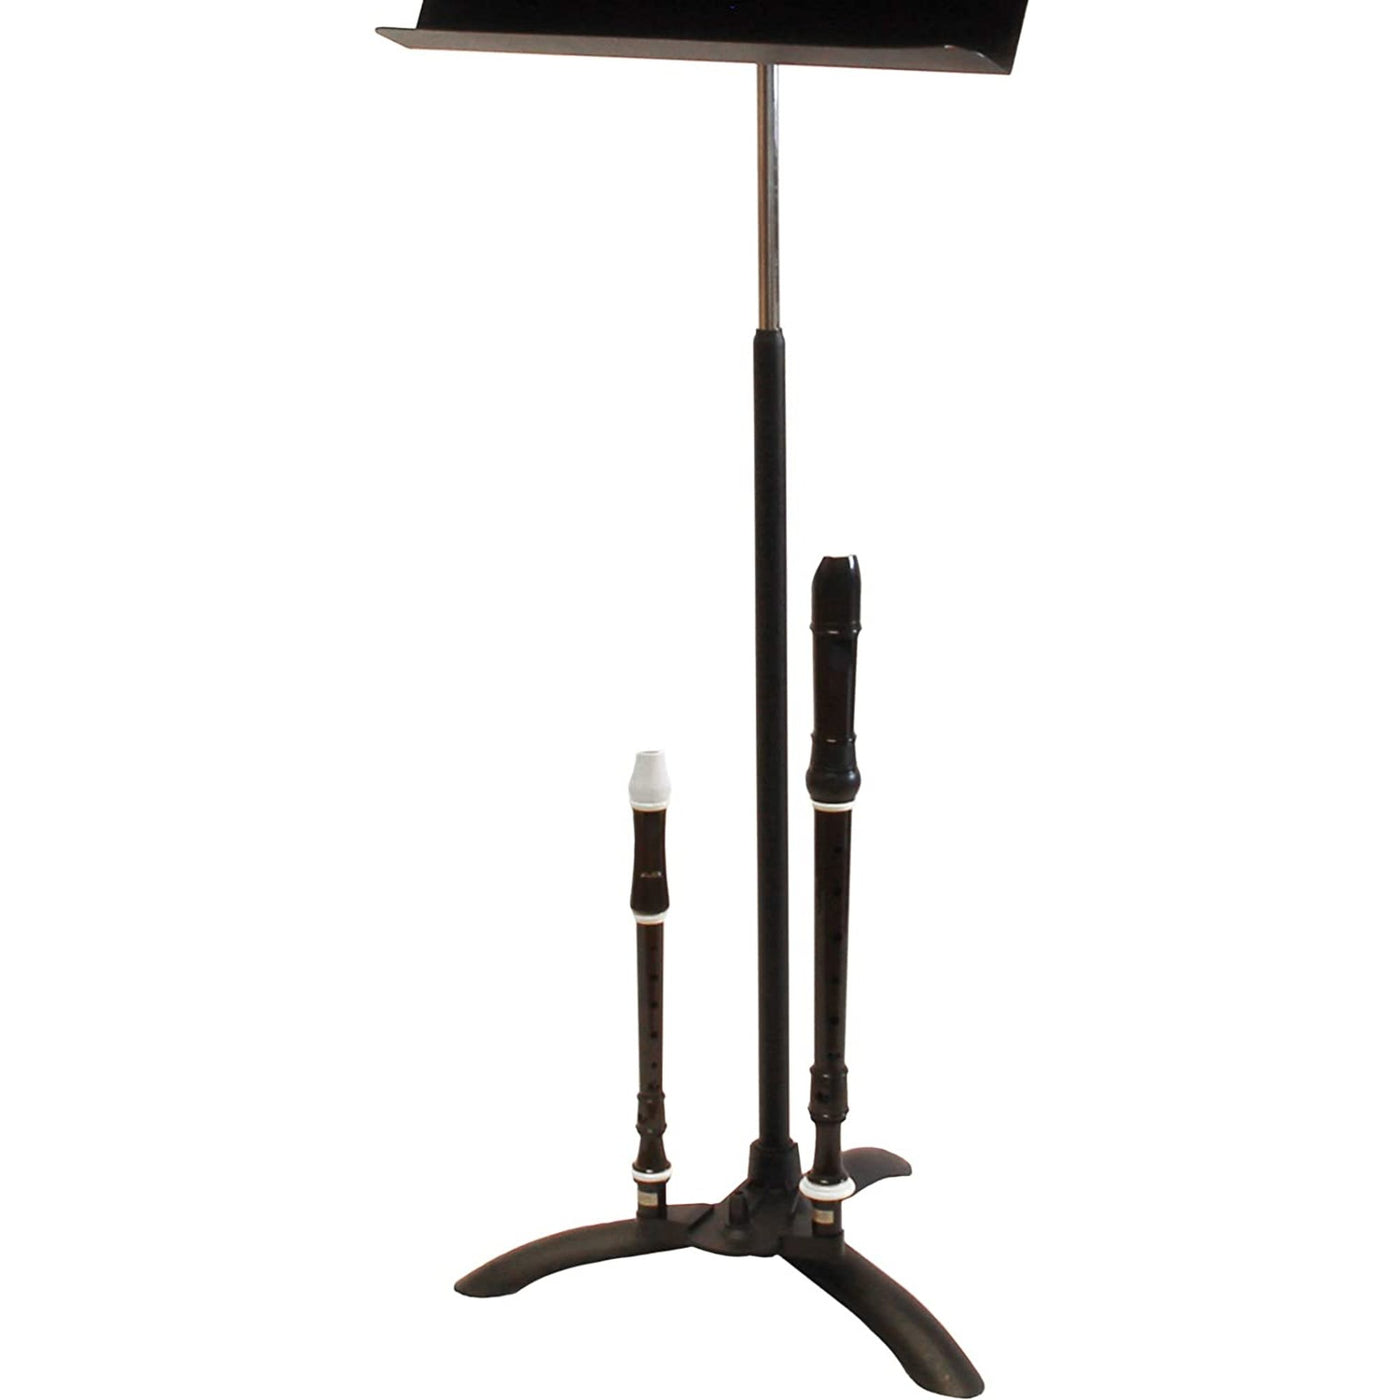 Manhasset Universal Dual Stand Adapter for Wind Instruments, Black (1420)